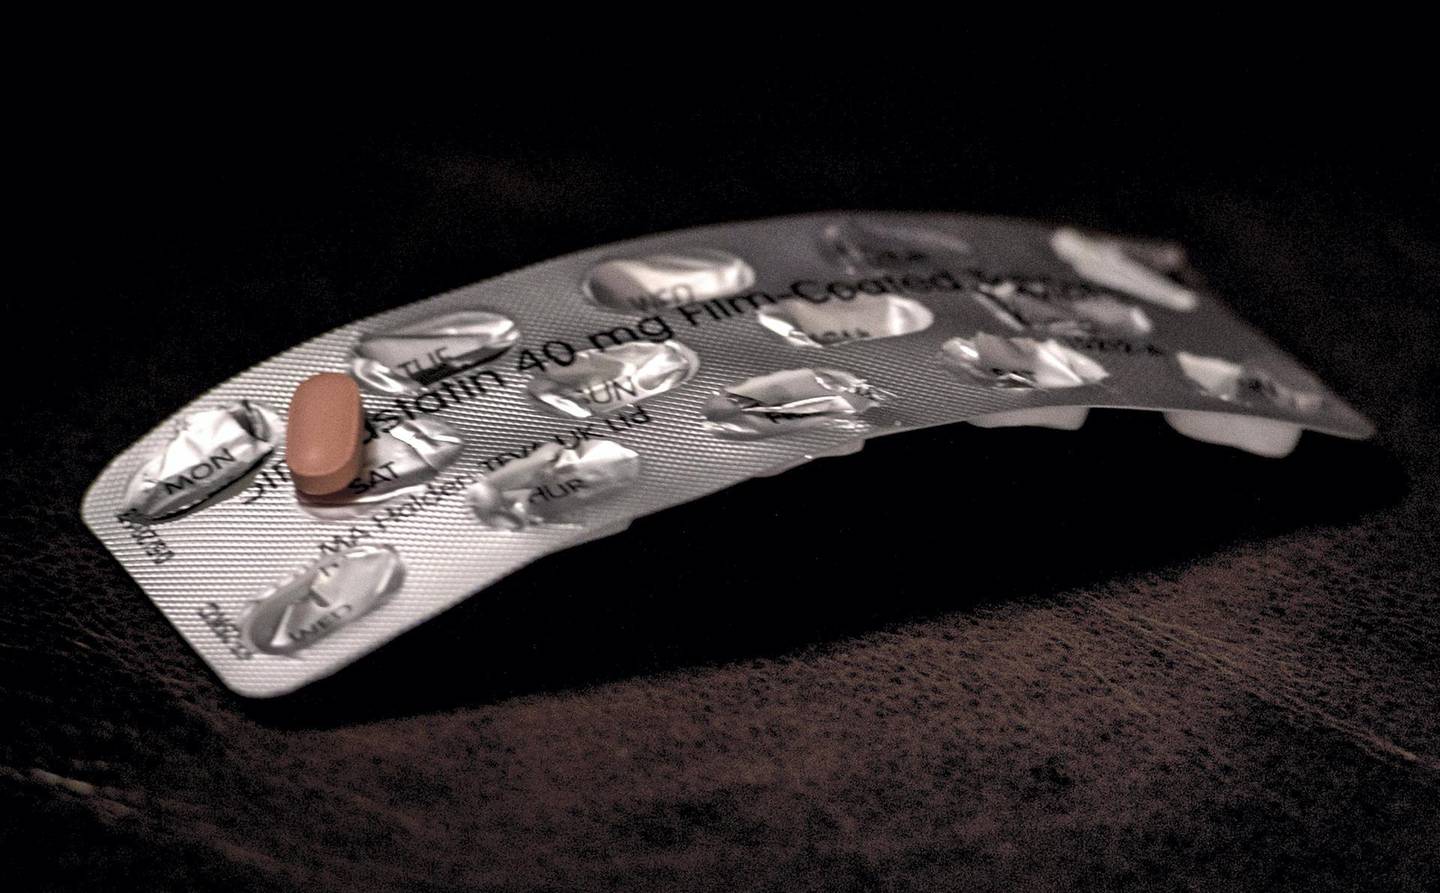 A statin tablet on an empty packet. (Photo by Lauren Hurley/PA Images via Getty Images)